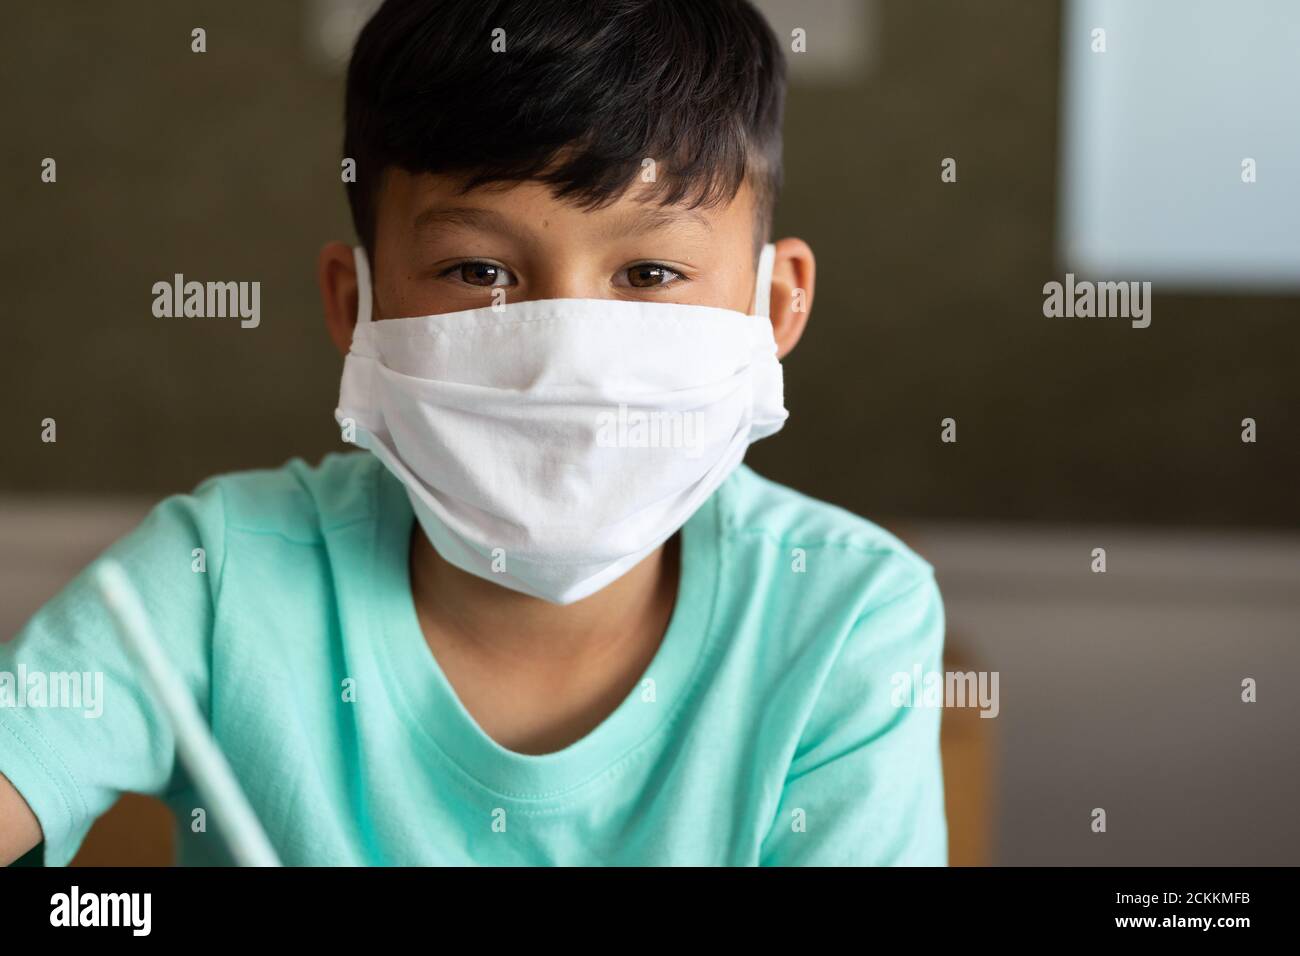 Portrait of boy wearing face mask at school Stock Photo